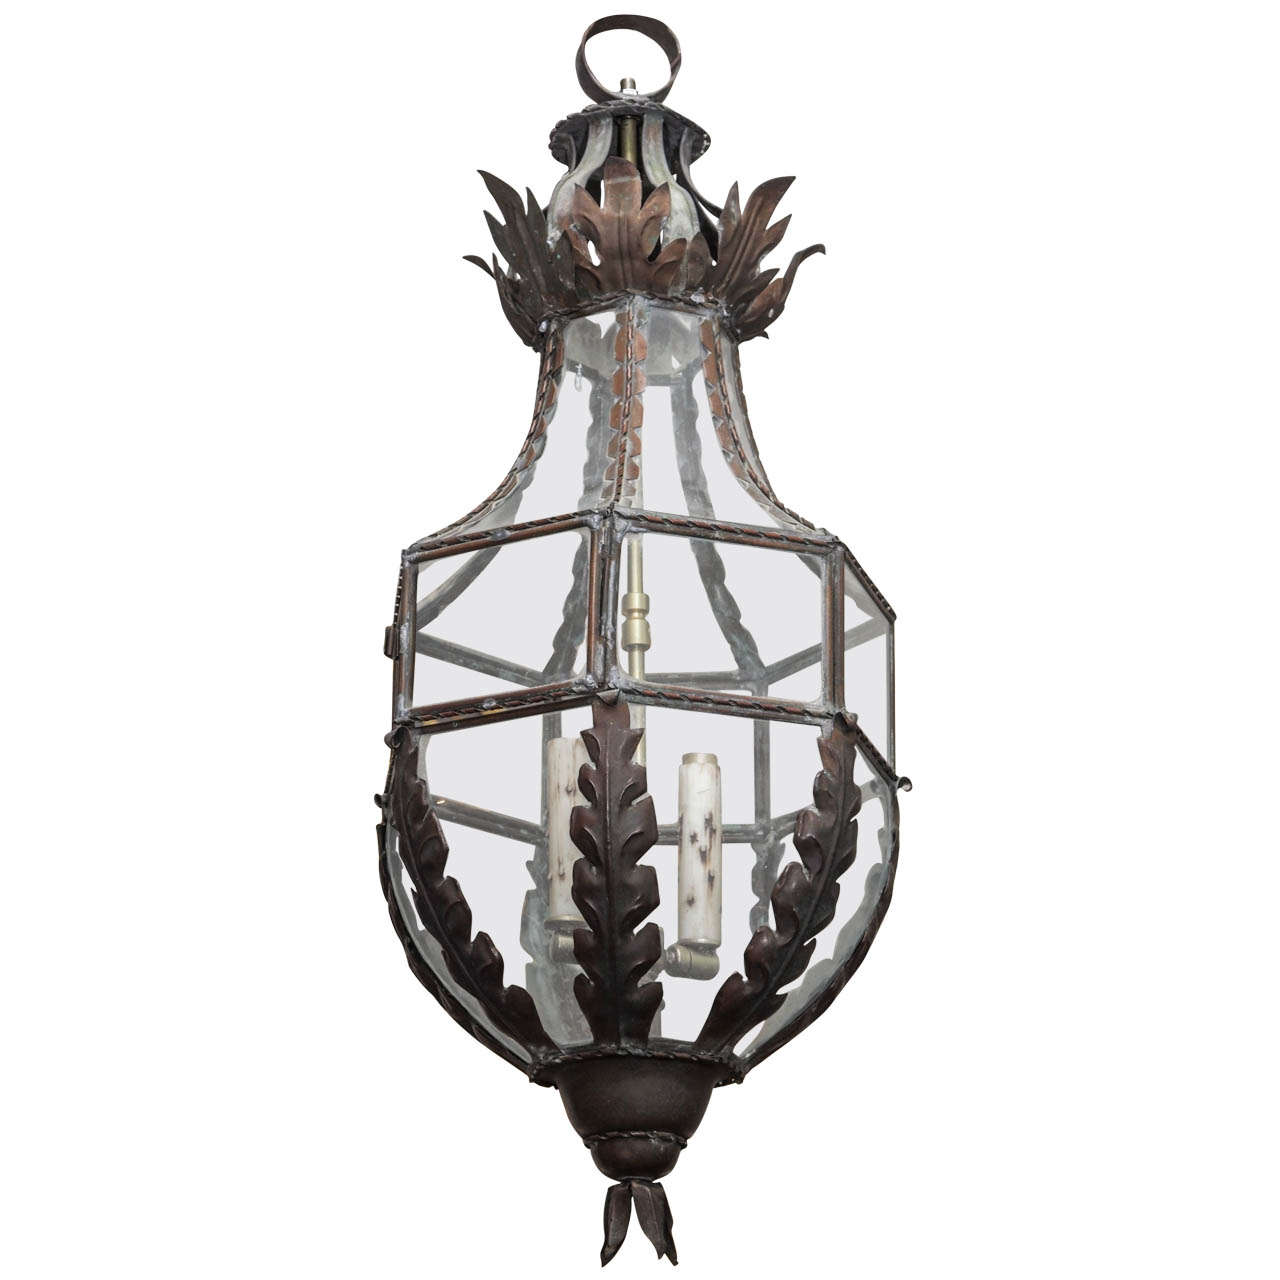 19th Century French Tole and Iron Lantern